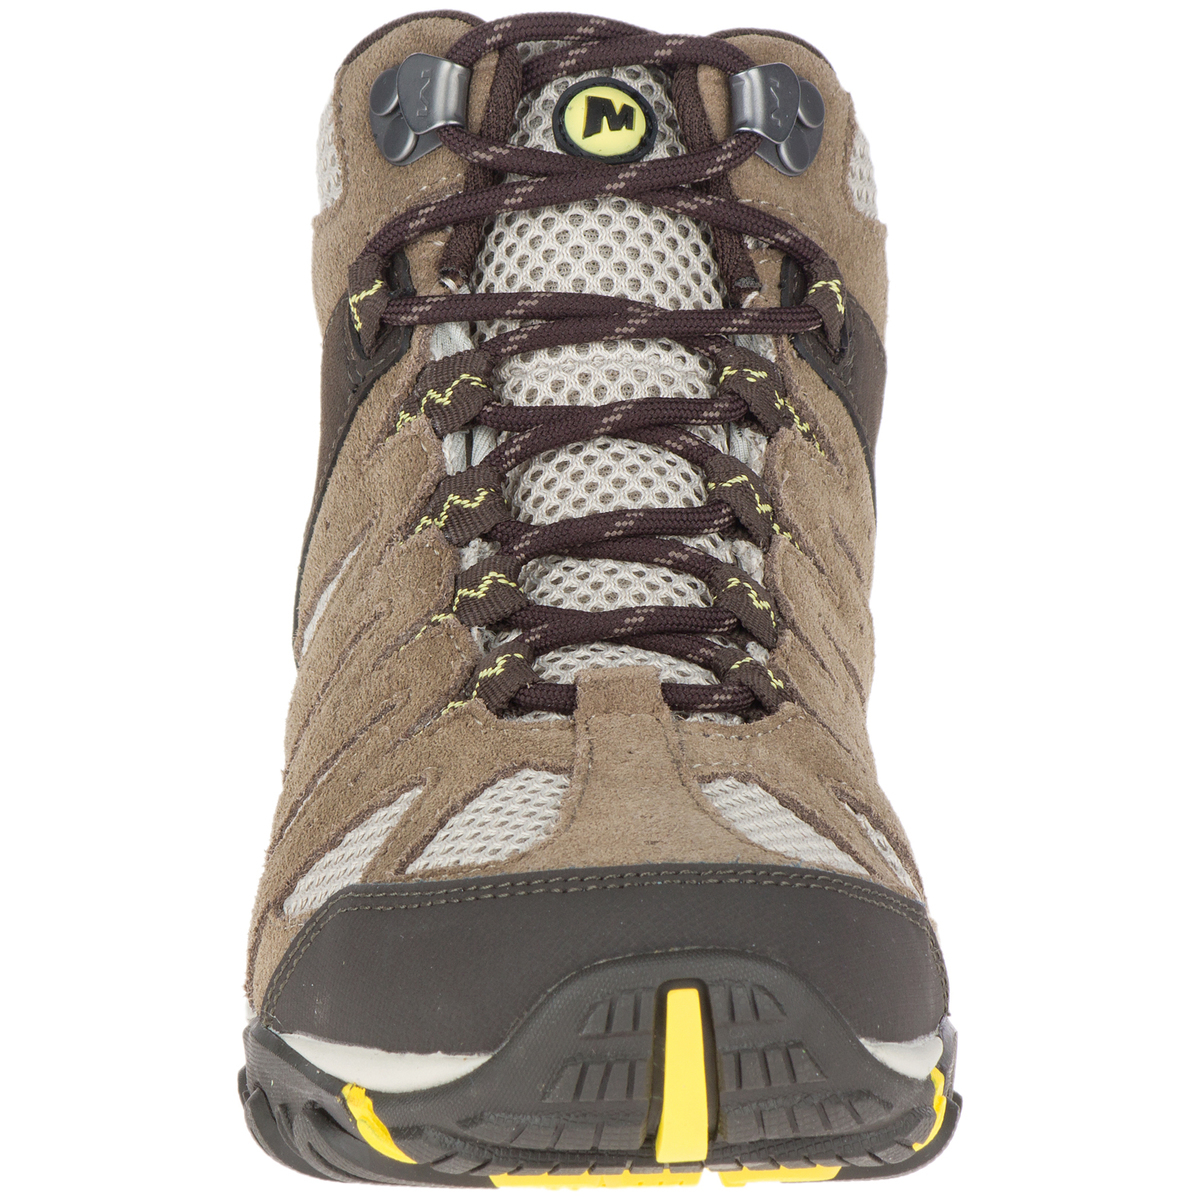 Merrell Women's Accentor 2 Waterproof Mid Hiking Boots - Brindle - Size ...